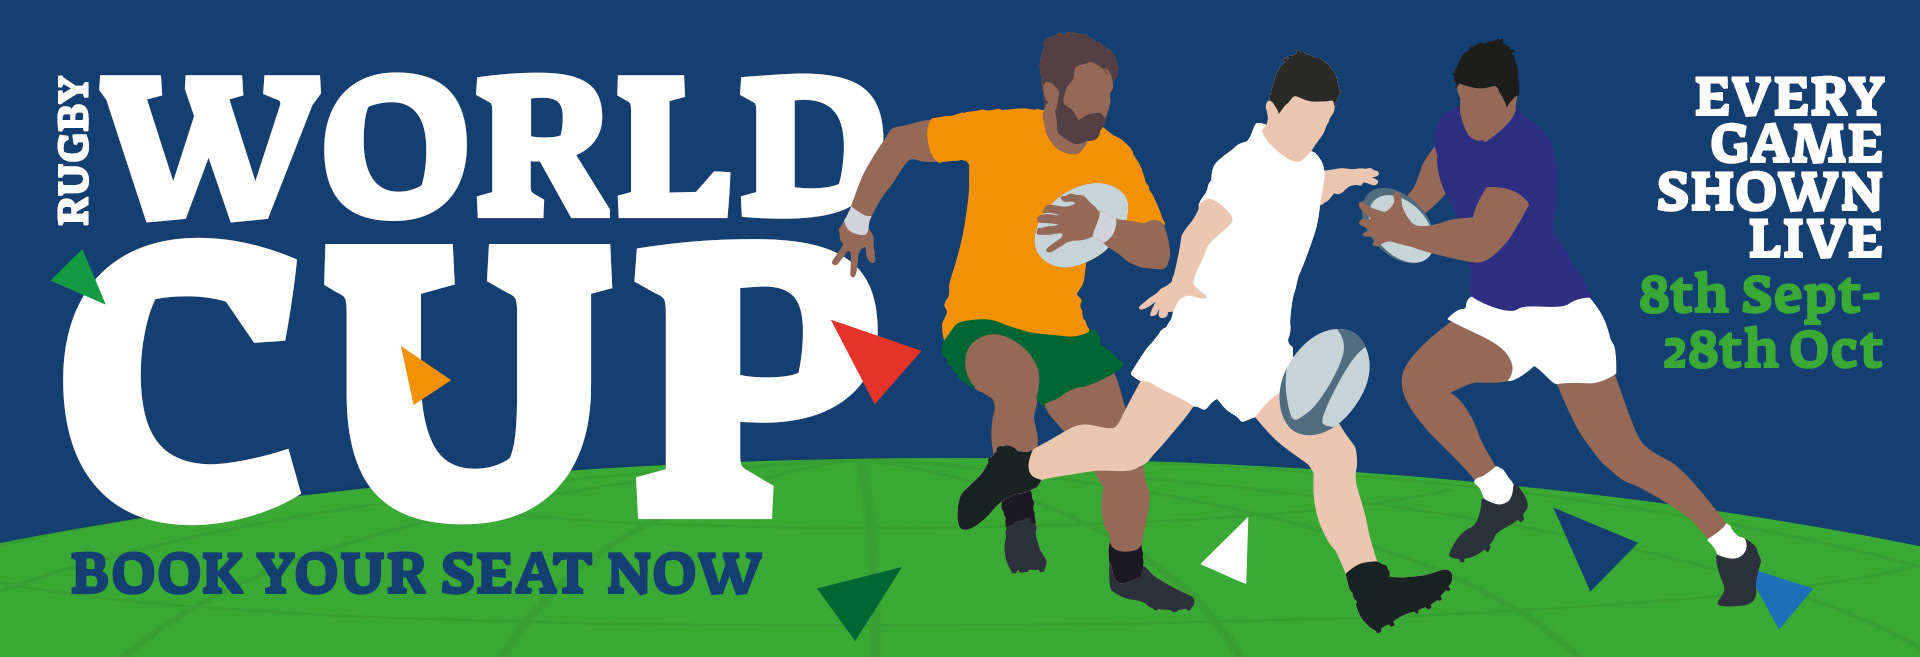 Watch the Rugby World Cup at The Bridge House